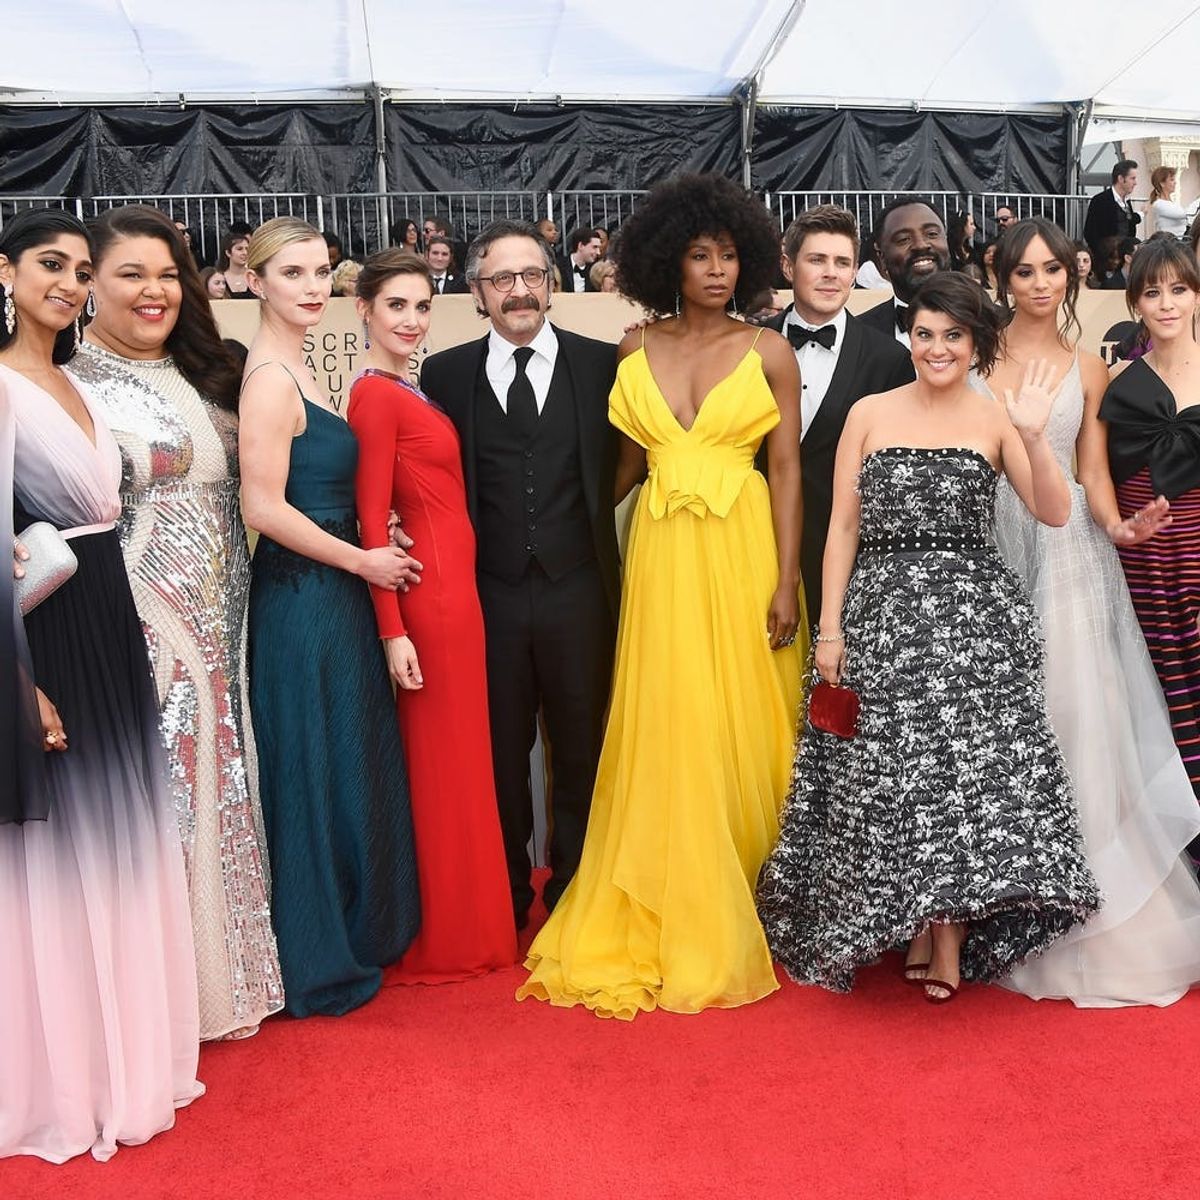 The ‘GLOW’ Cast Is #SquadGoals at the 2018 SAG Awards